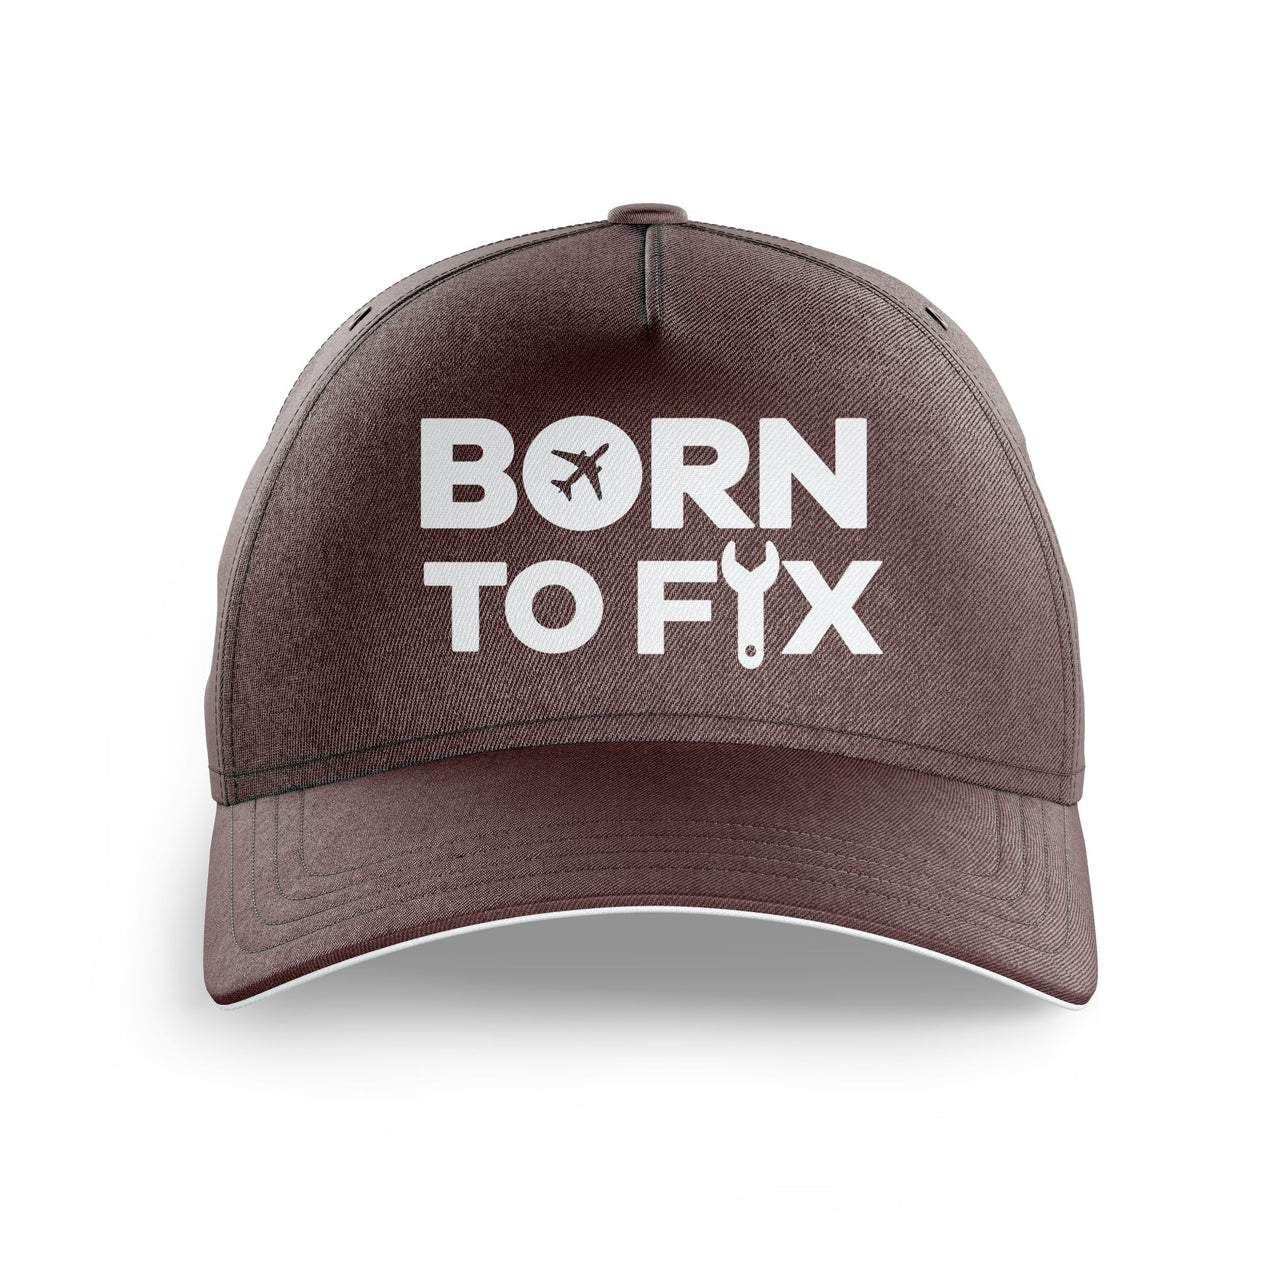 Born To Fix Airplanes Printed Hats